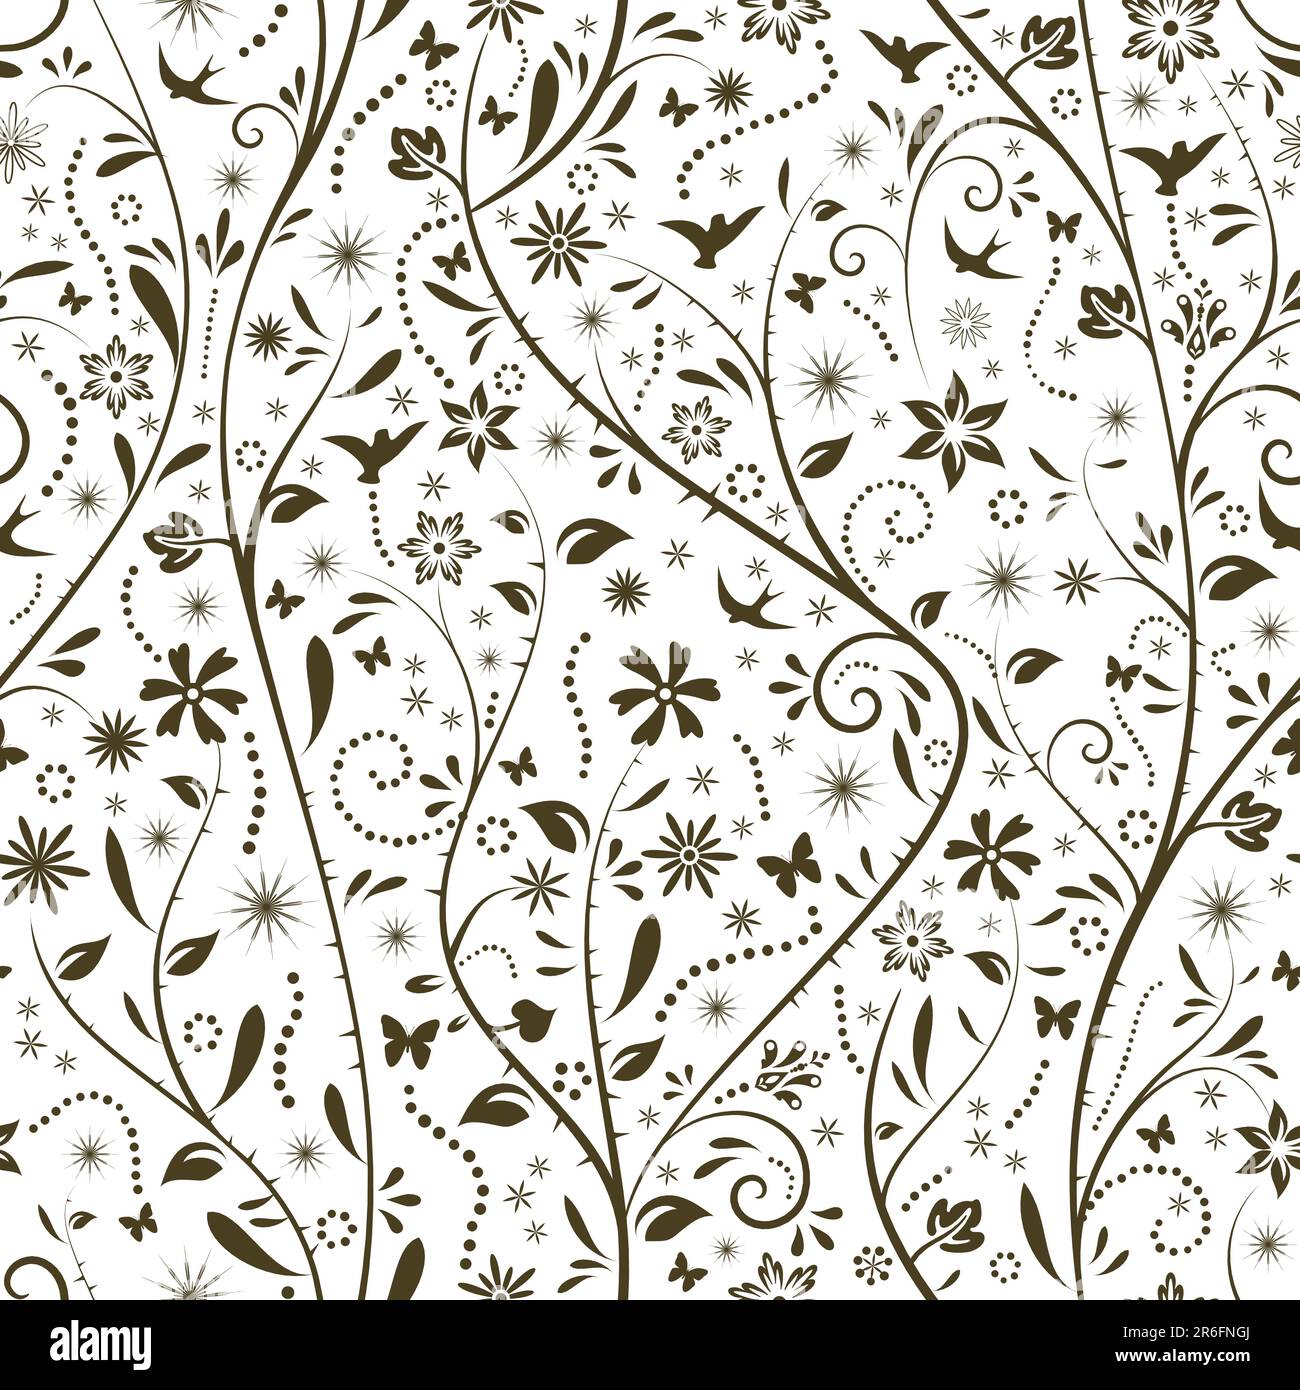 Floral pattern with flower, butterfly and bird silhouettes that tiles seamlessly. Great for spring designs. Stock Vector